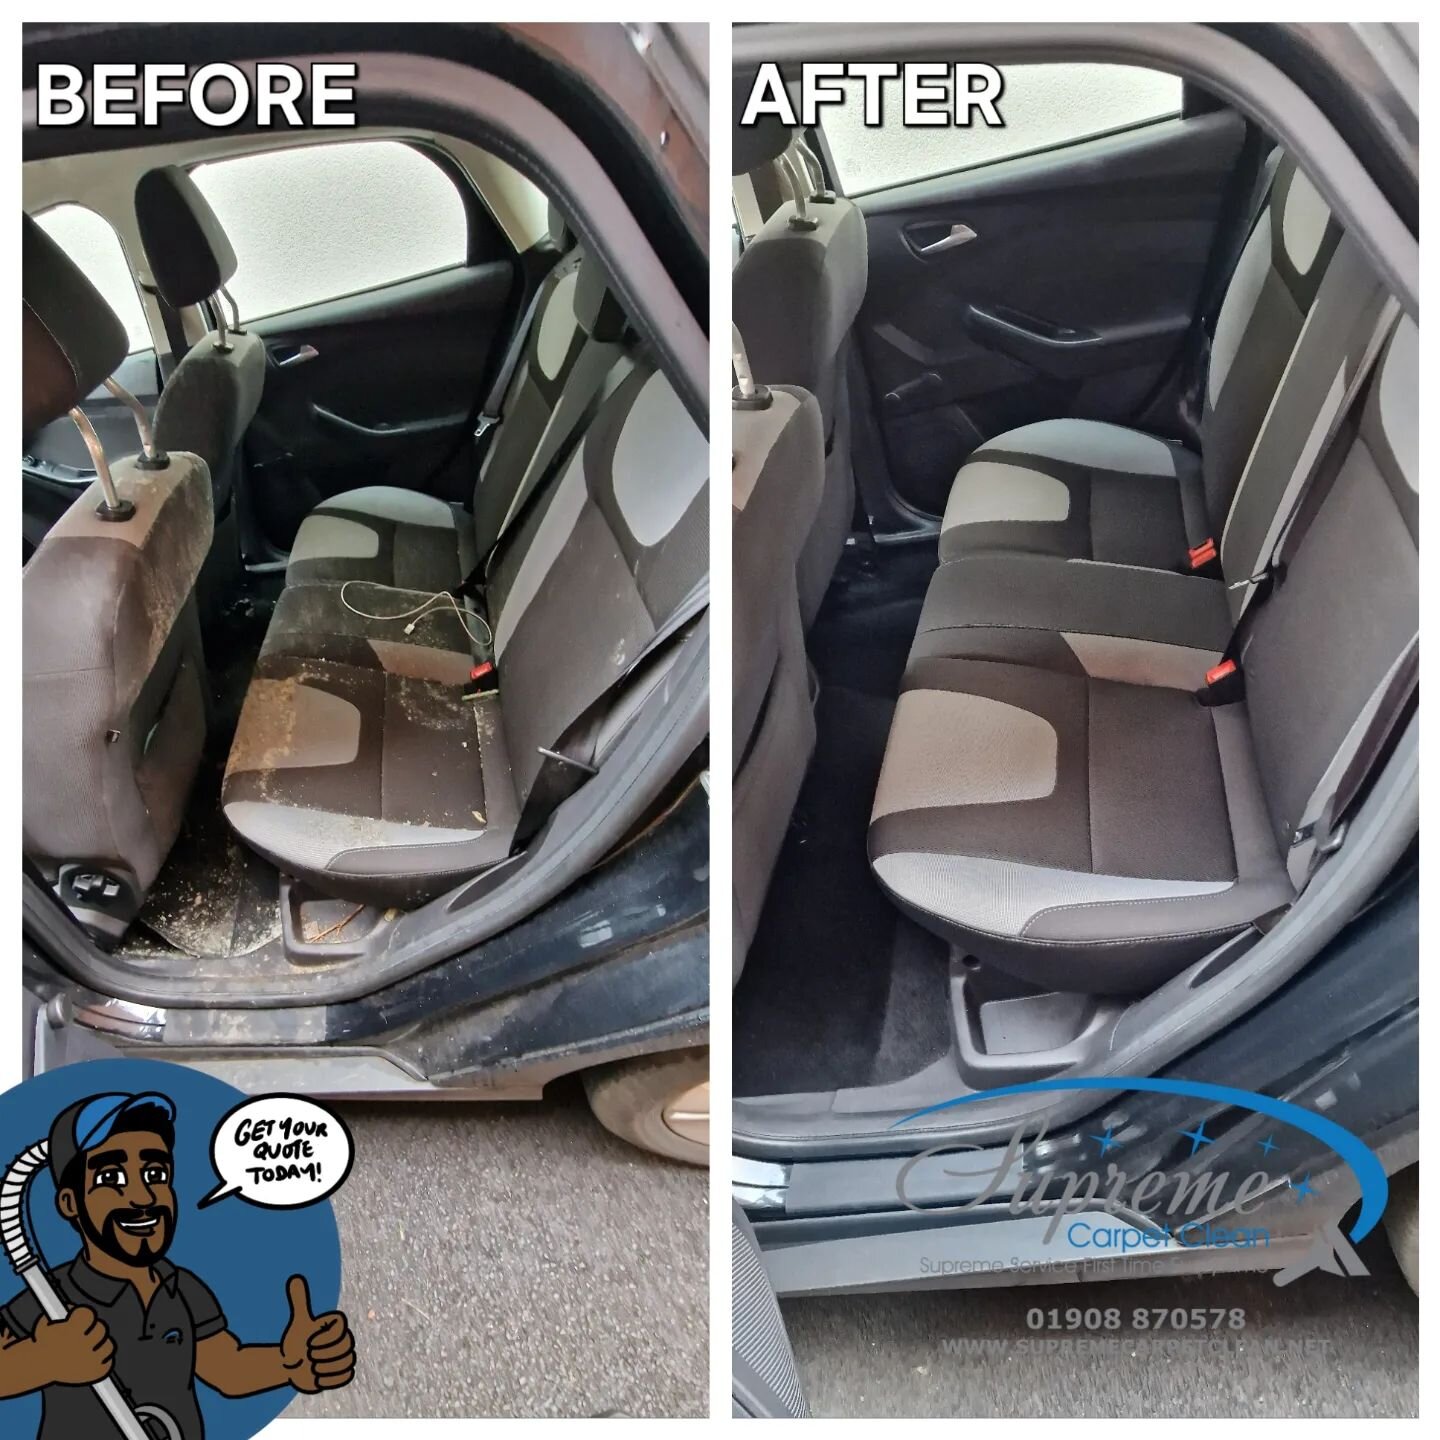 When germs are lurking in your vehicle upholstery?

FREE QUOTES AVAILABLE - WE COVER NATIONWIDE

#carupholsterycleaning #cleaning #supremecarpetclean #vehicleupholsterycleaning #beforeandafter #satisfying #OurWork